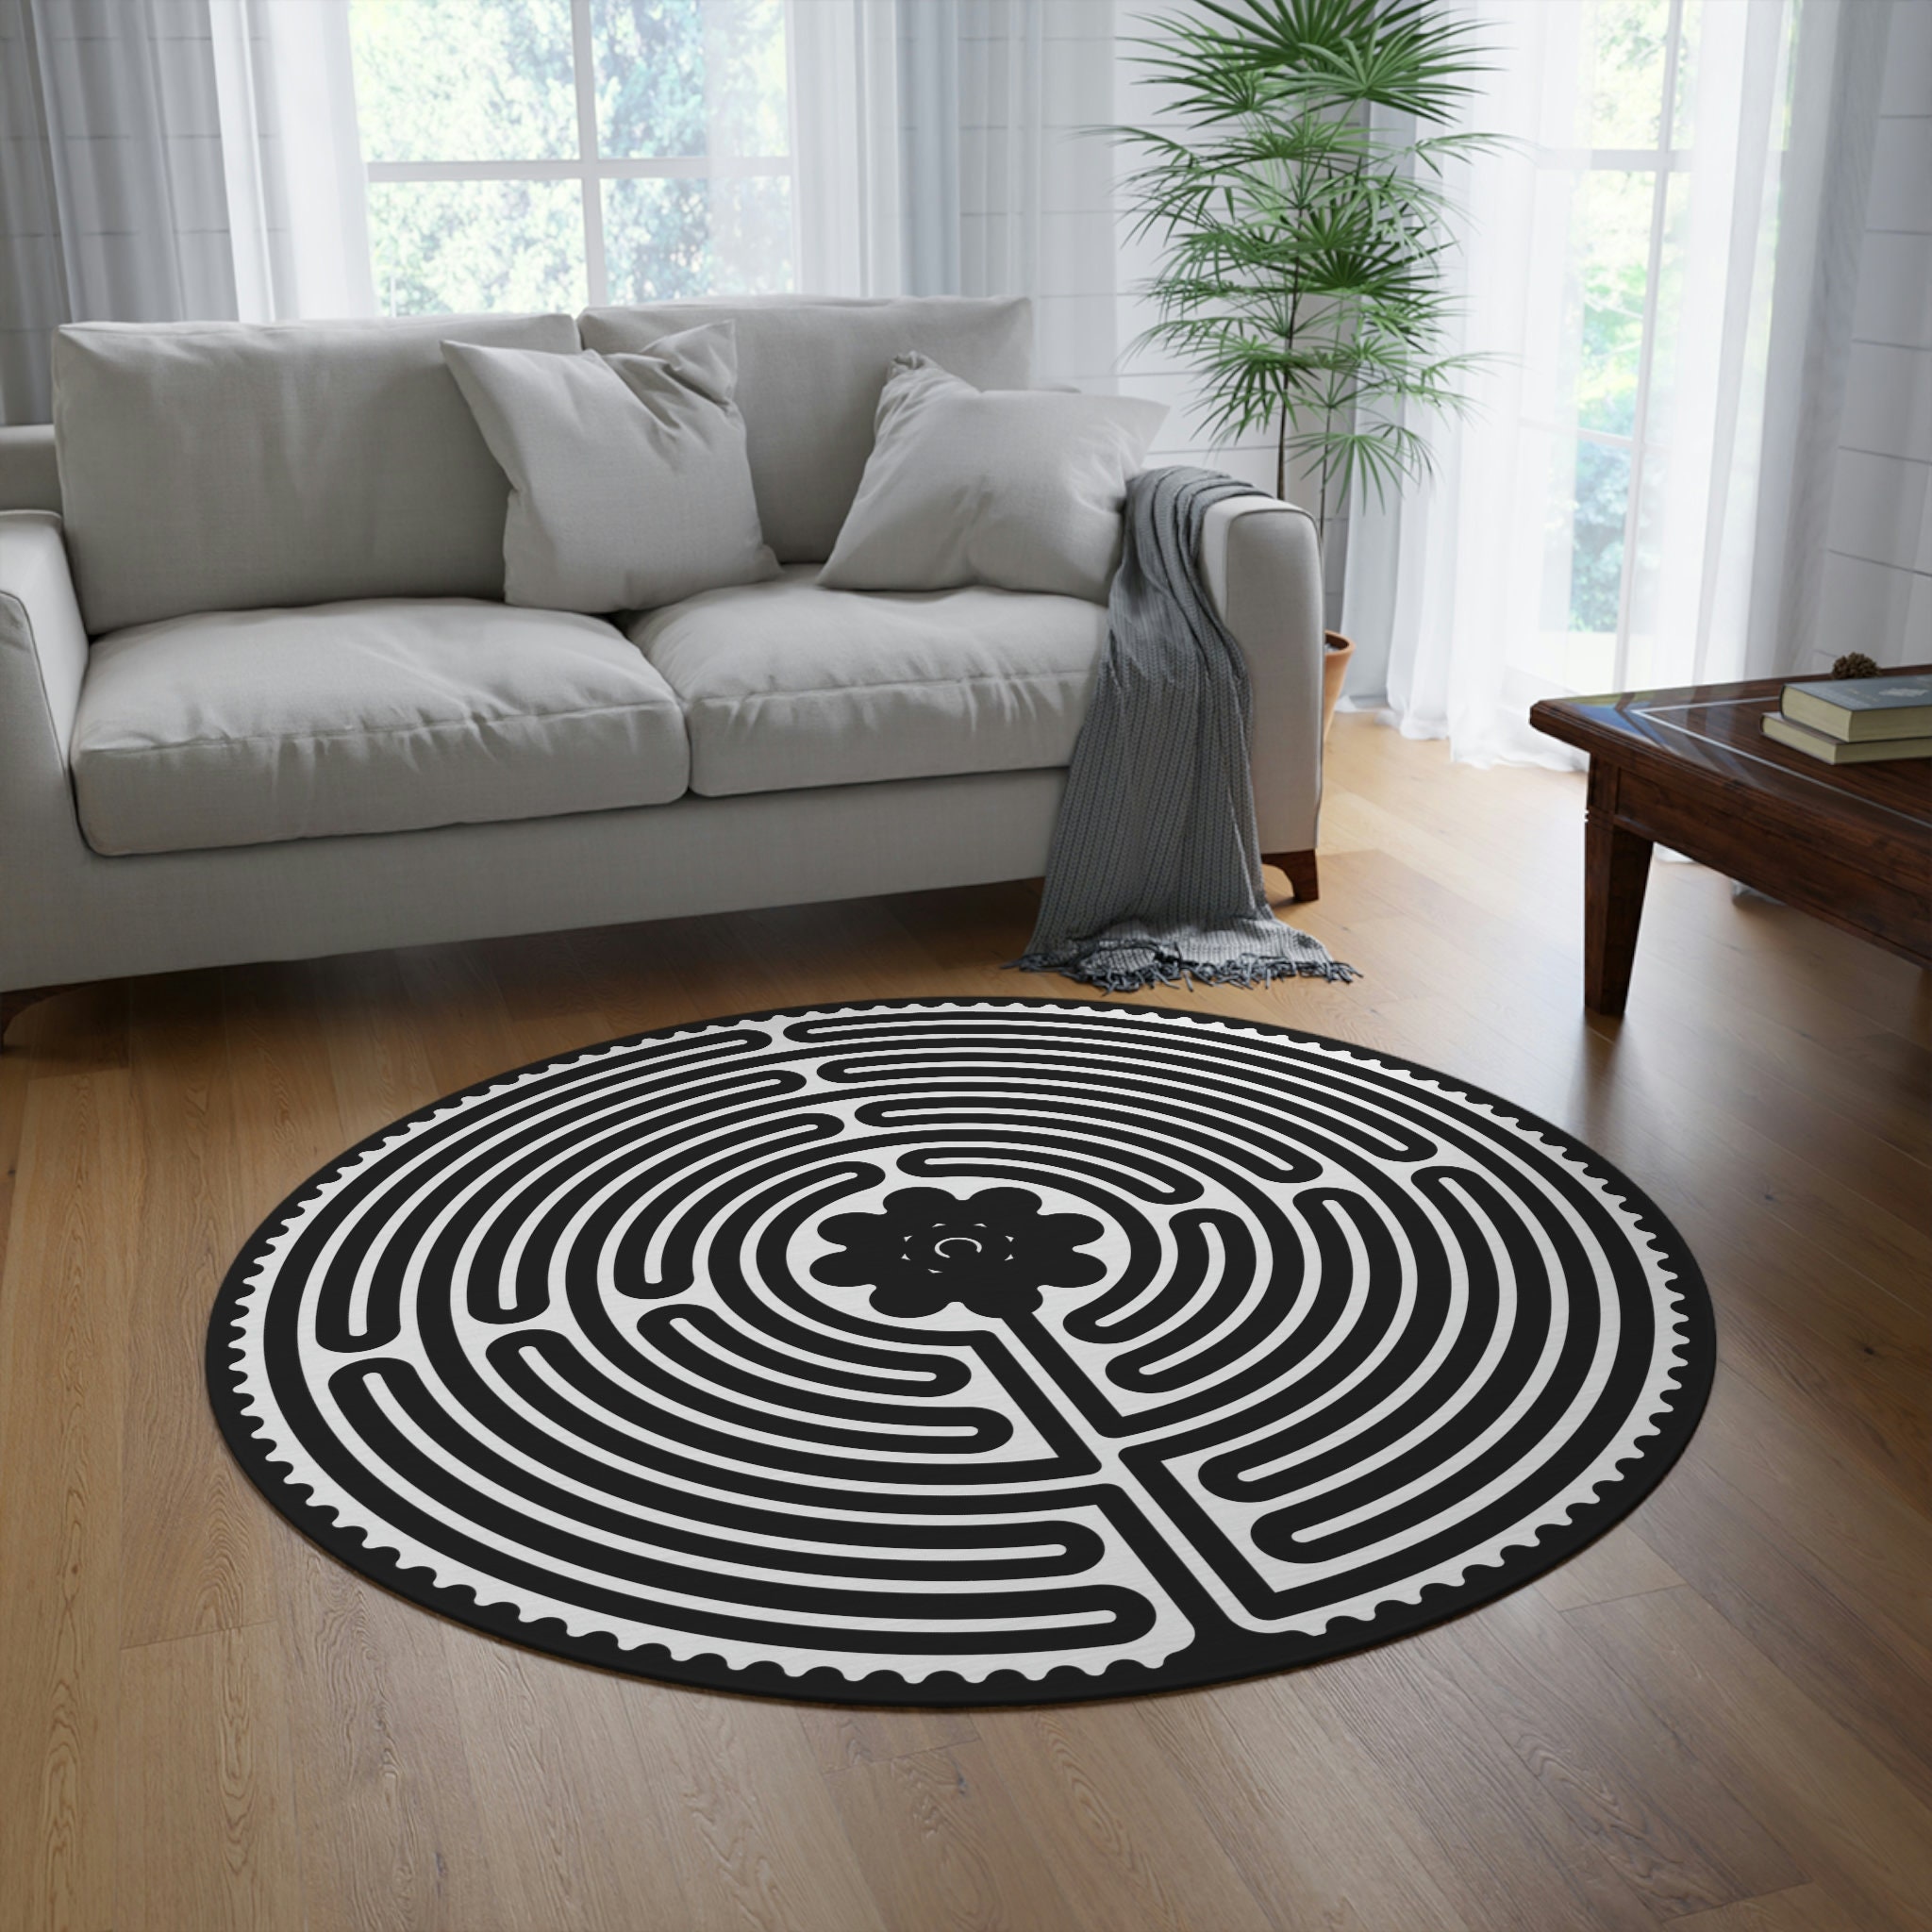  Kid Rug Maze Labyrinth Stone Walls Dungeon Escape Puzzle Game  Level Design Woven Area Rug with Tassels Patio Mat Carpet Boho Home Decor  Outdoor Living Room Kid Bedroom Playroom Nursery Rug